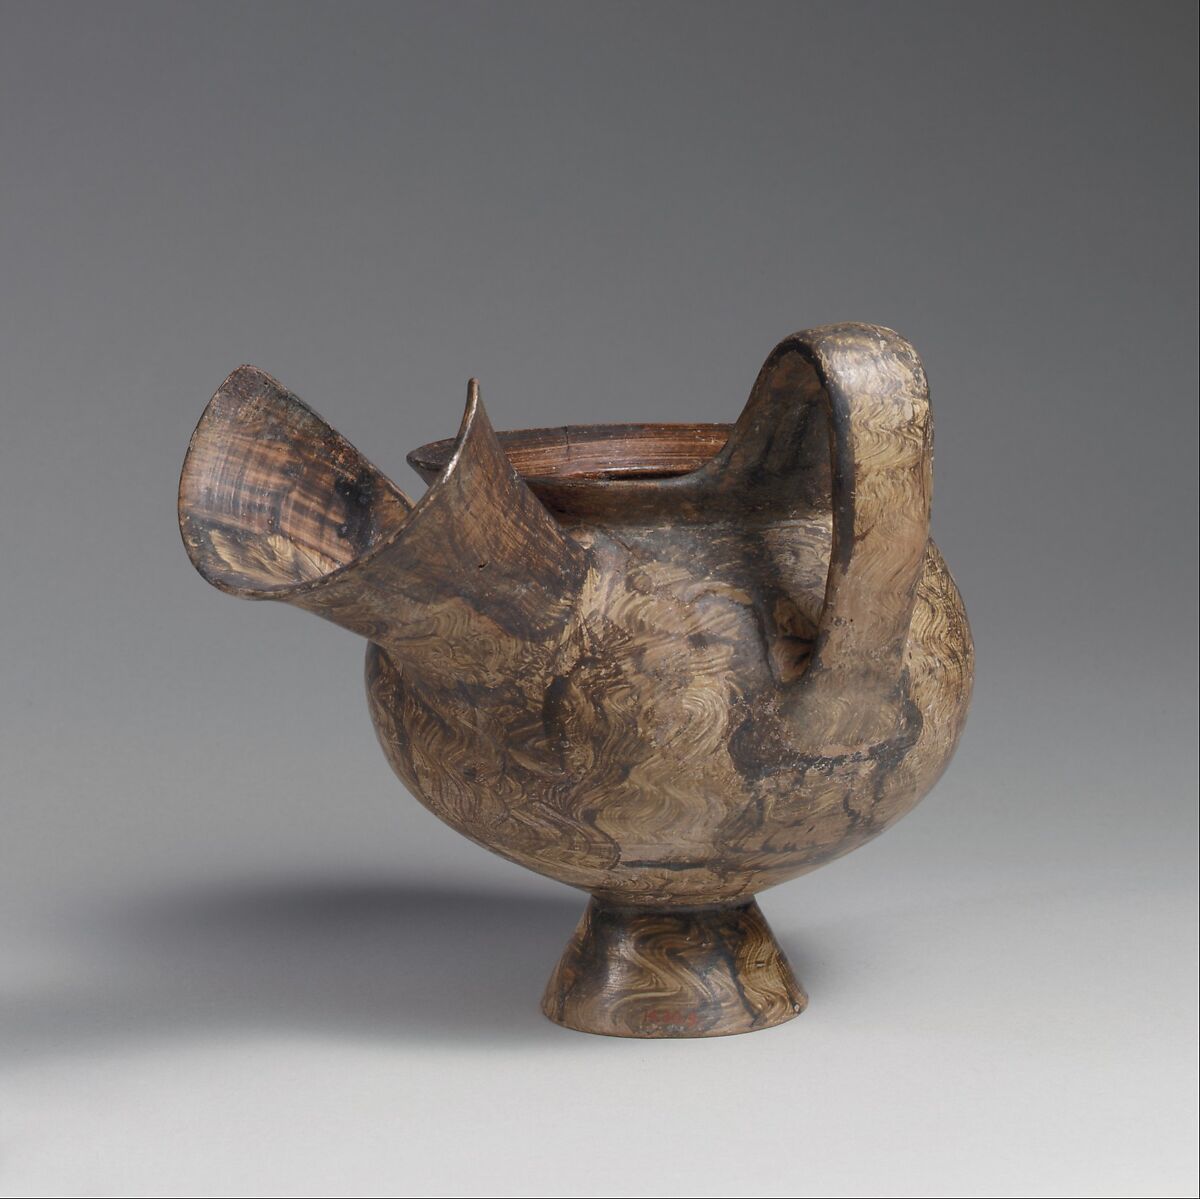 Terracotta jug with an oversize spout